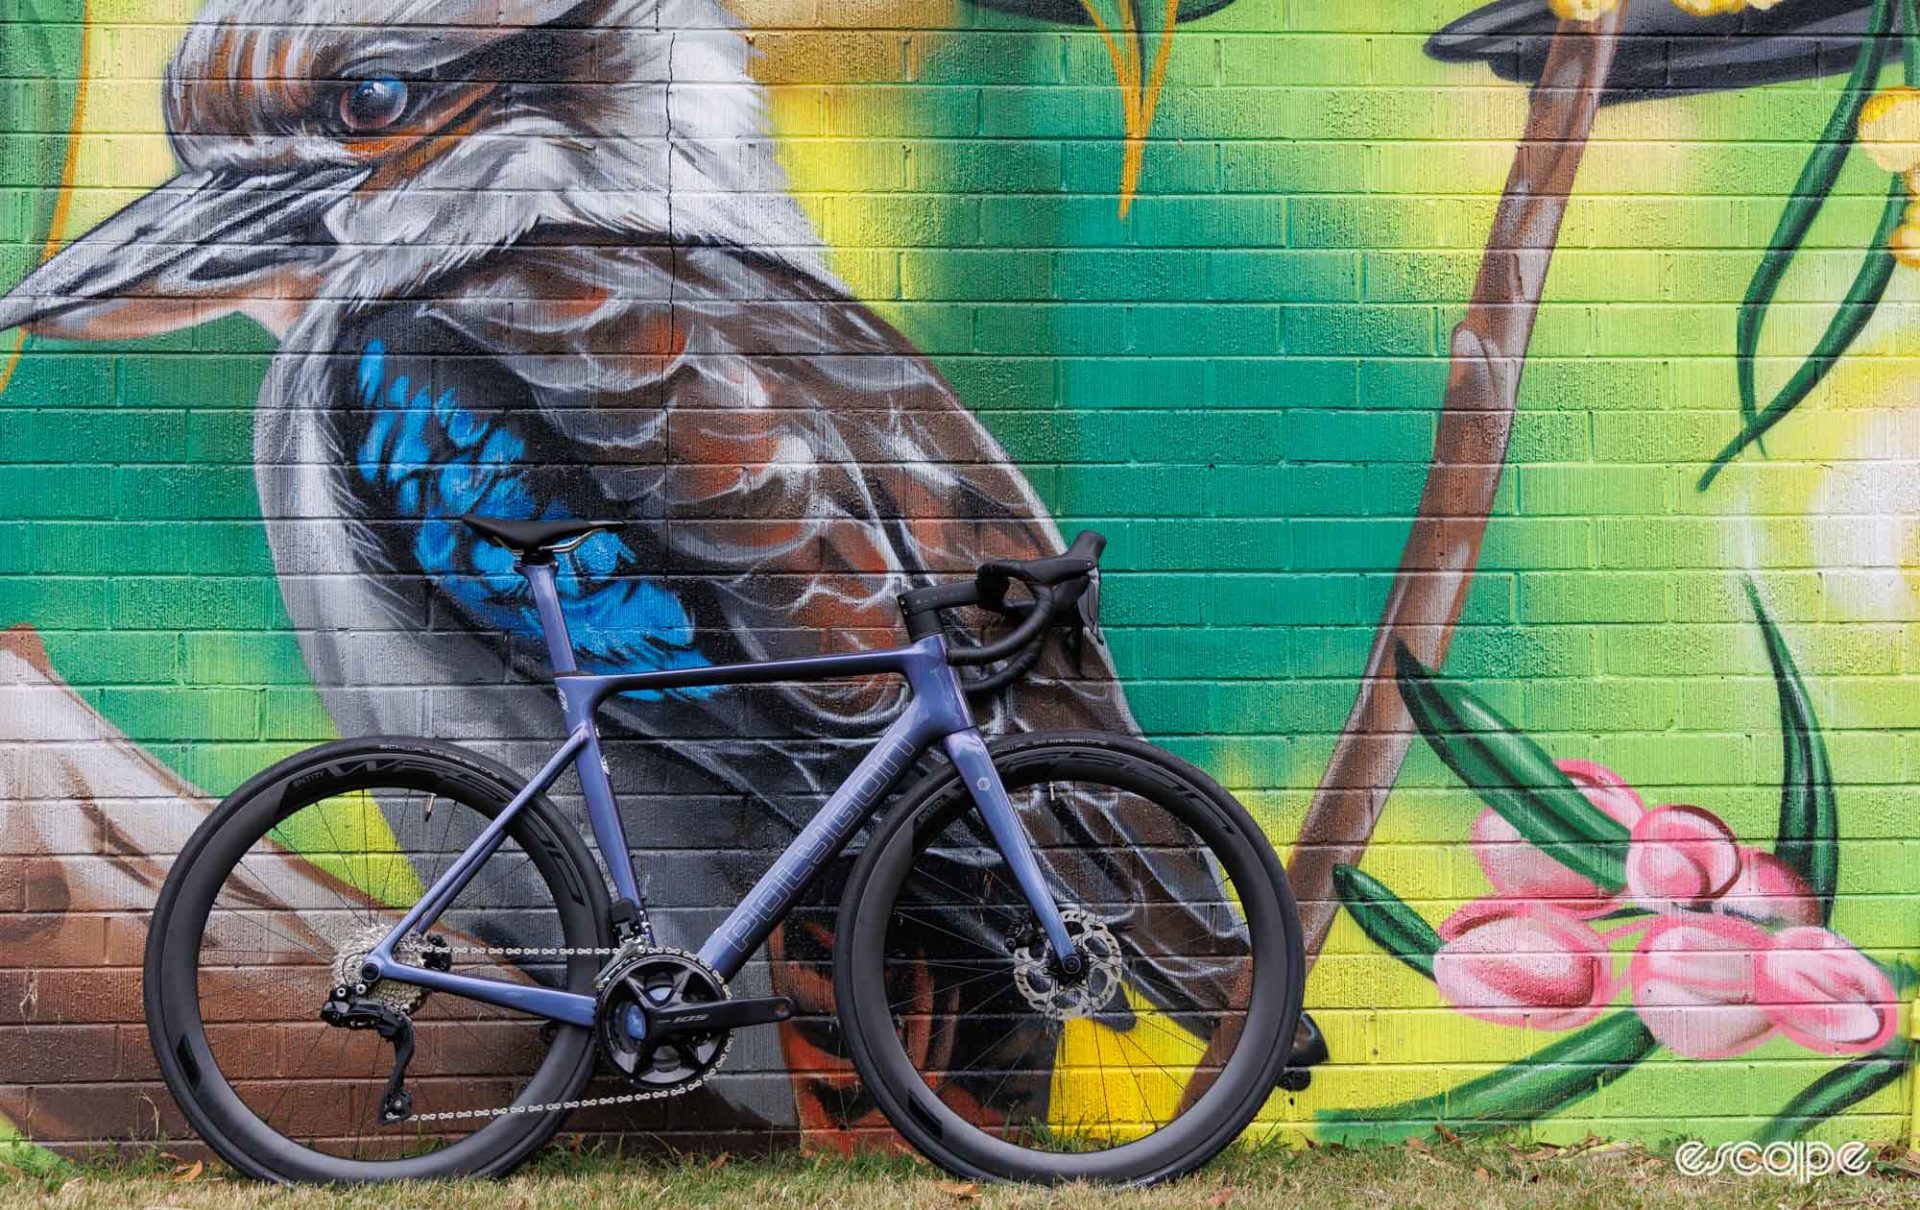 A side-on view of the Polygon Helios A7X, taken against a painted wall of a Kookaburra. 